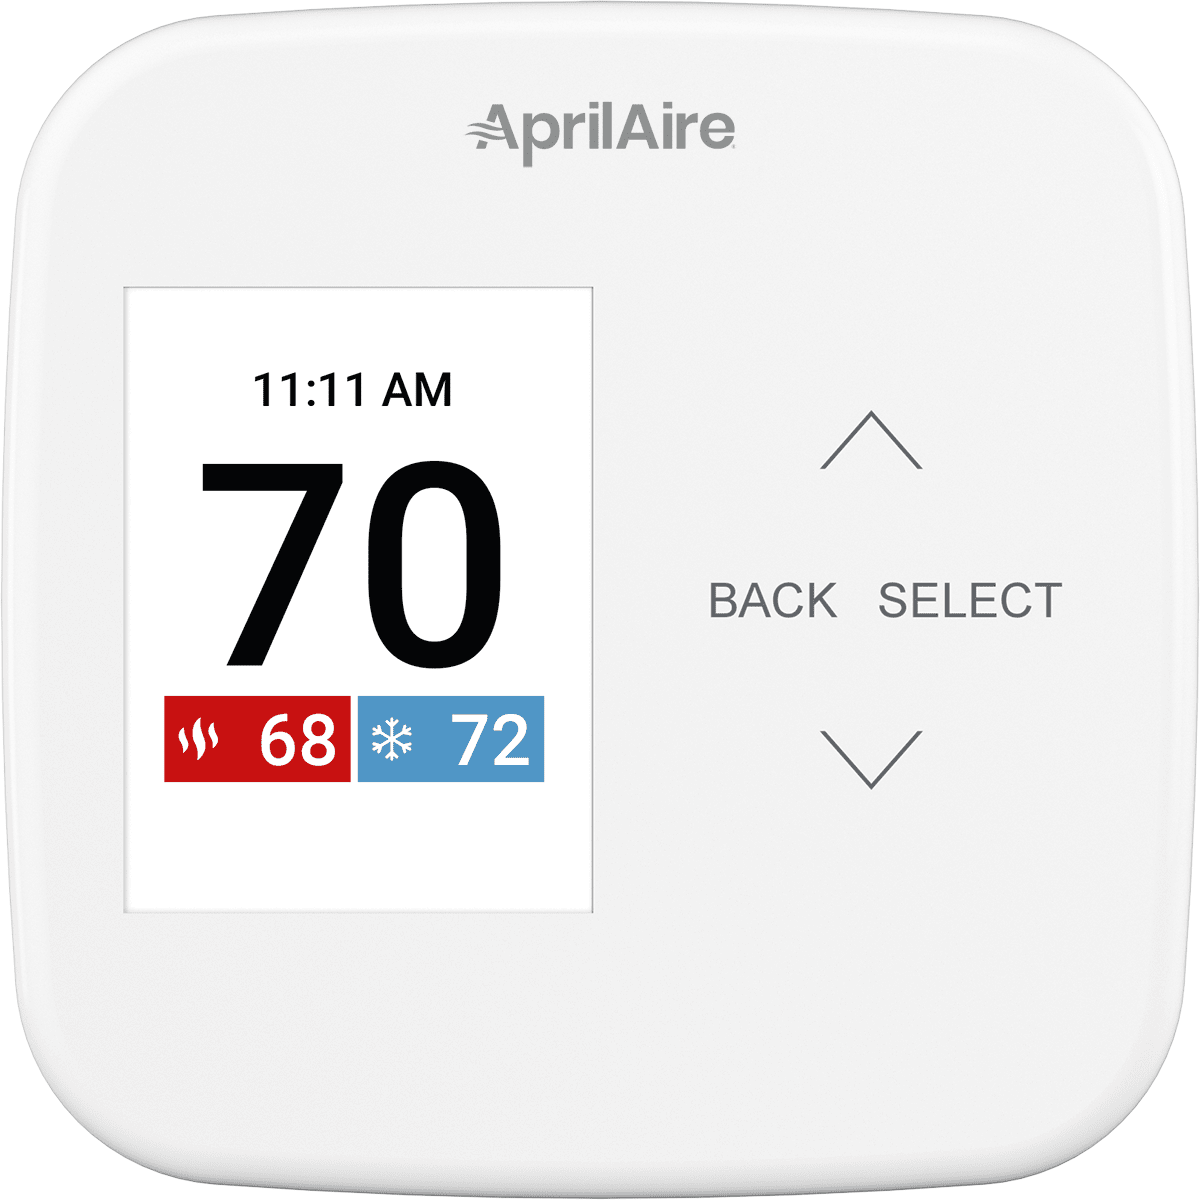 Aprilaire S86NMUPR Programmable Multi-Stage Universal Thermostat w/ IAQ Control - No Wi-Fi